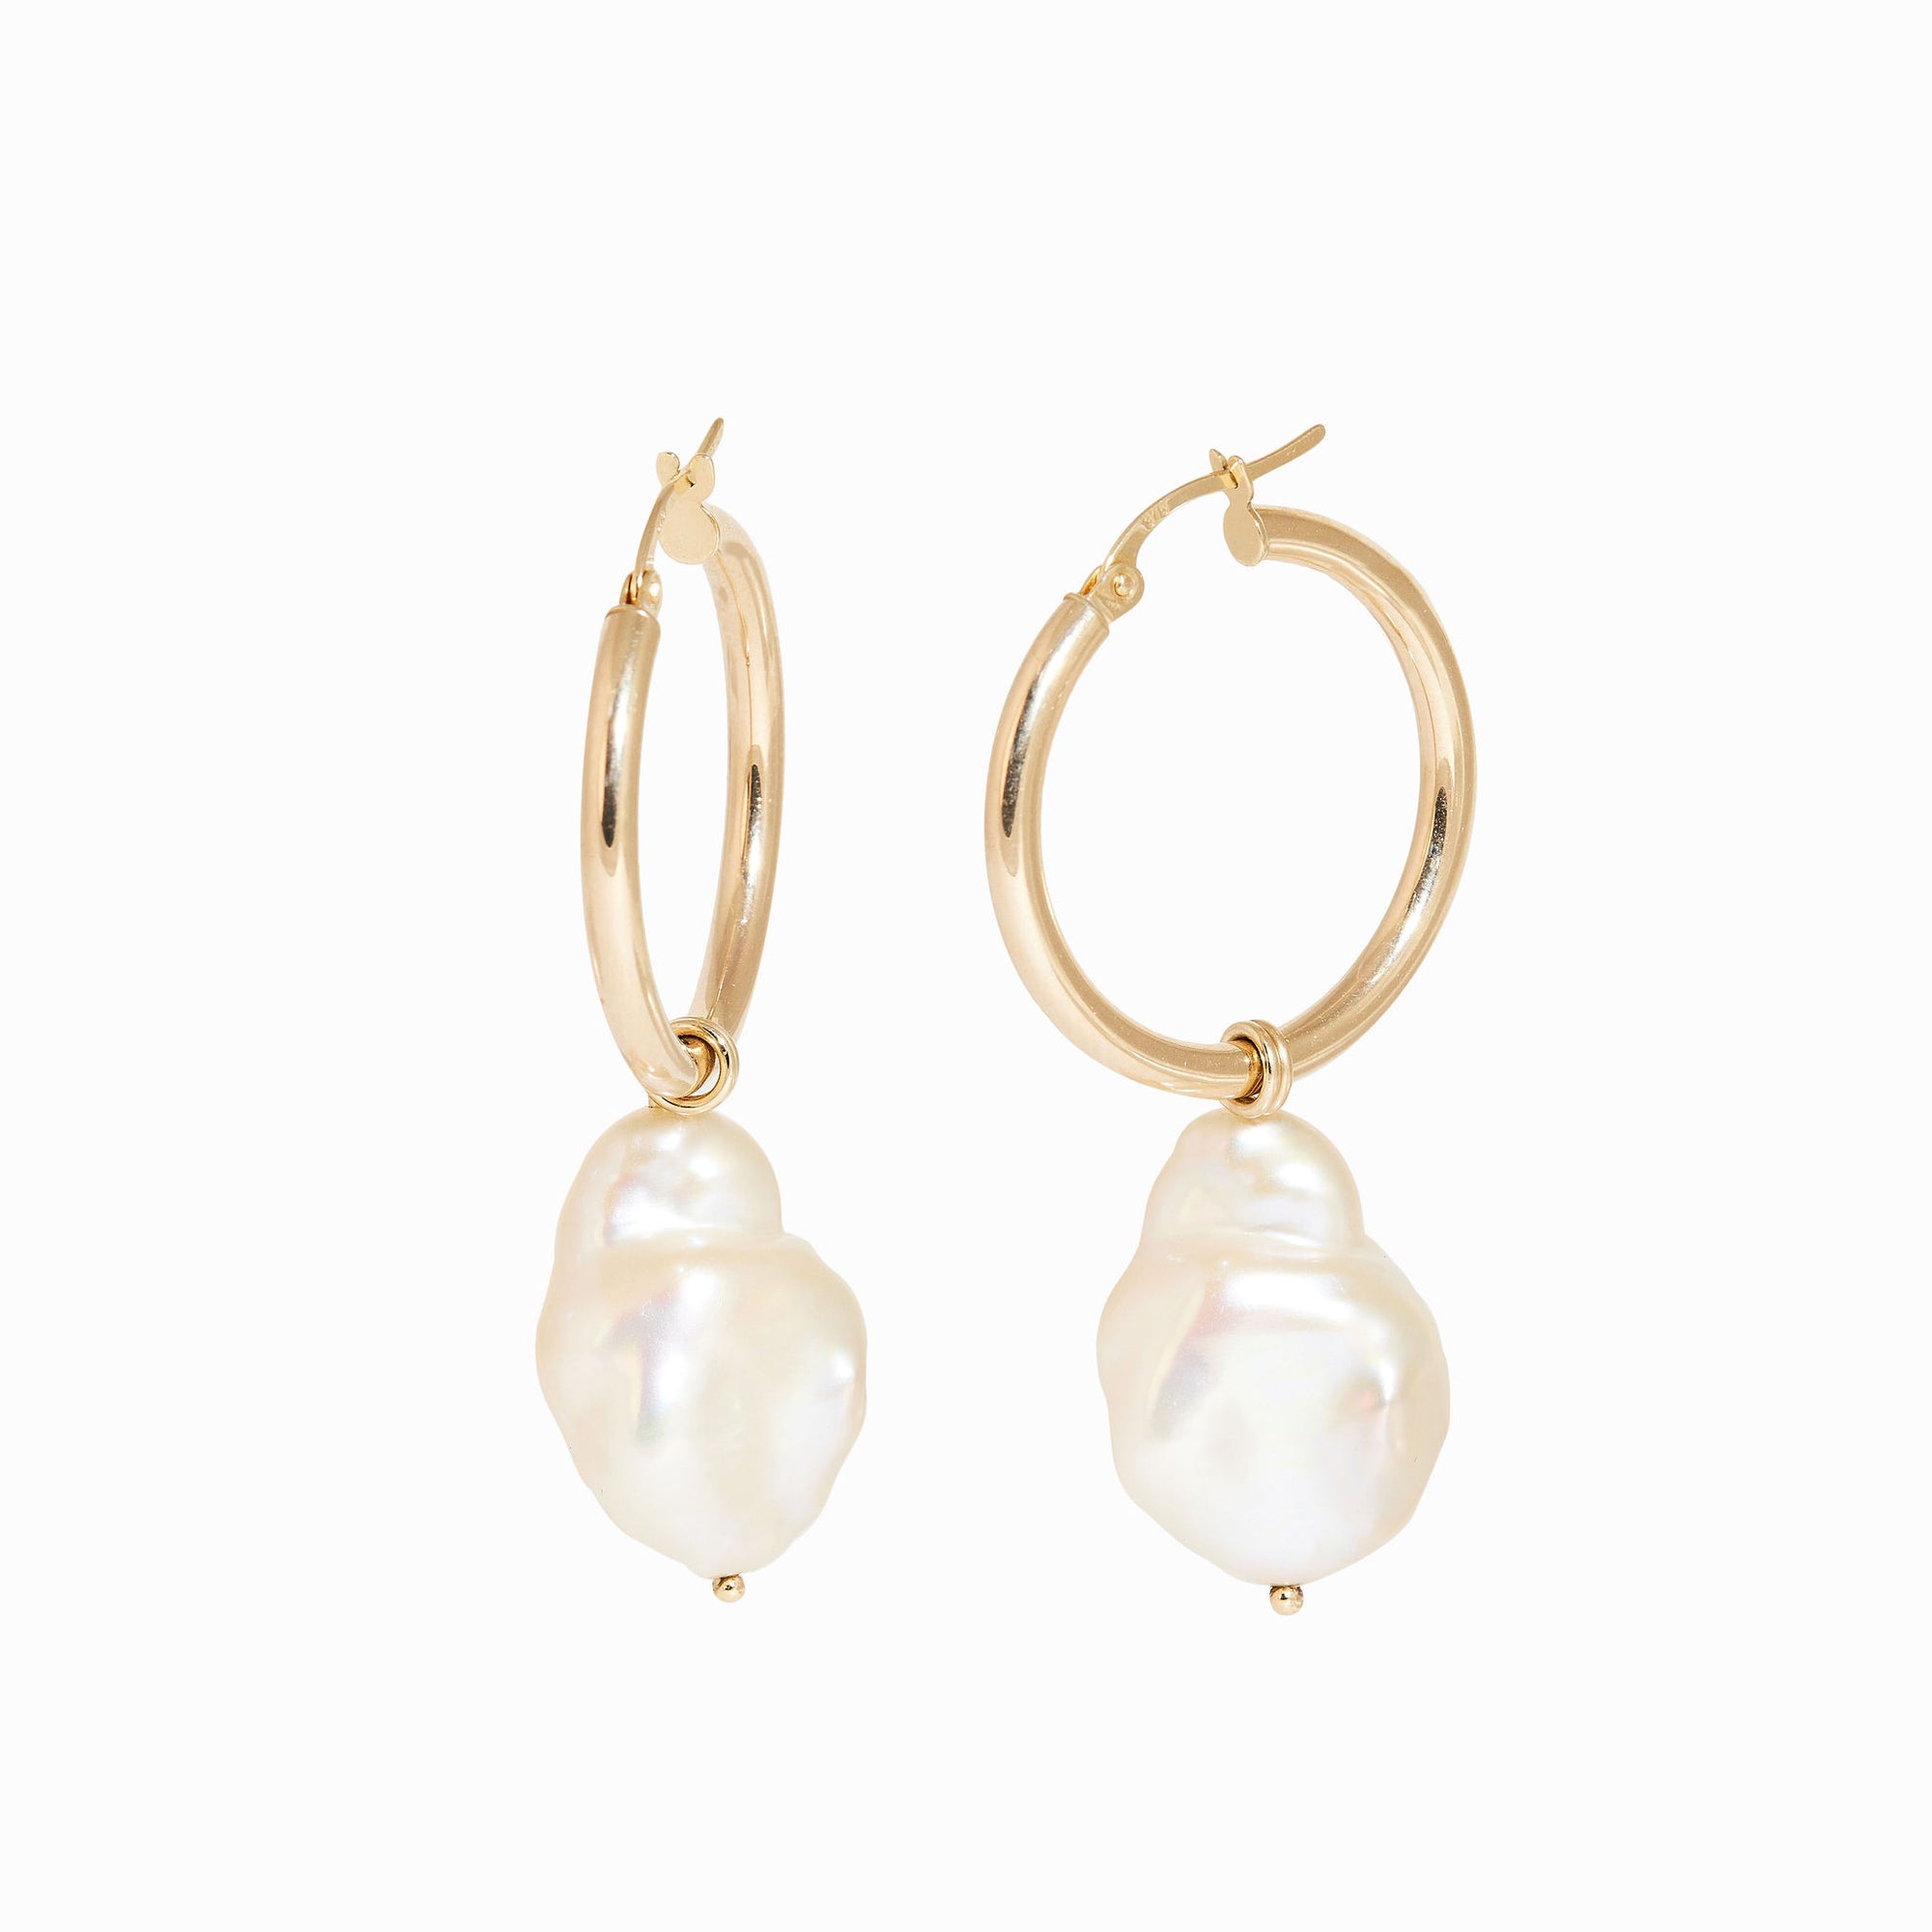 Bespoke, handmade and crafted in Melbourne by Black Finch. heavy 9ct hoops with drop pearl.